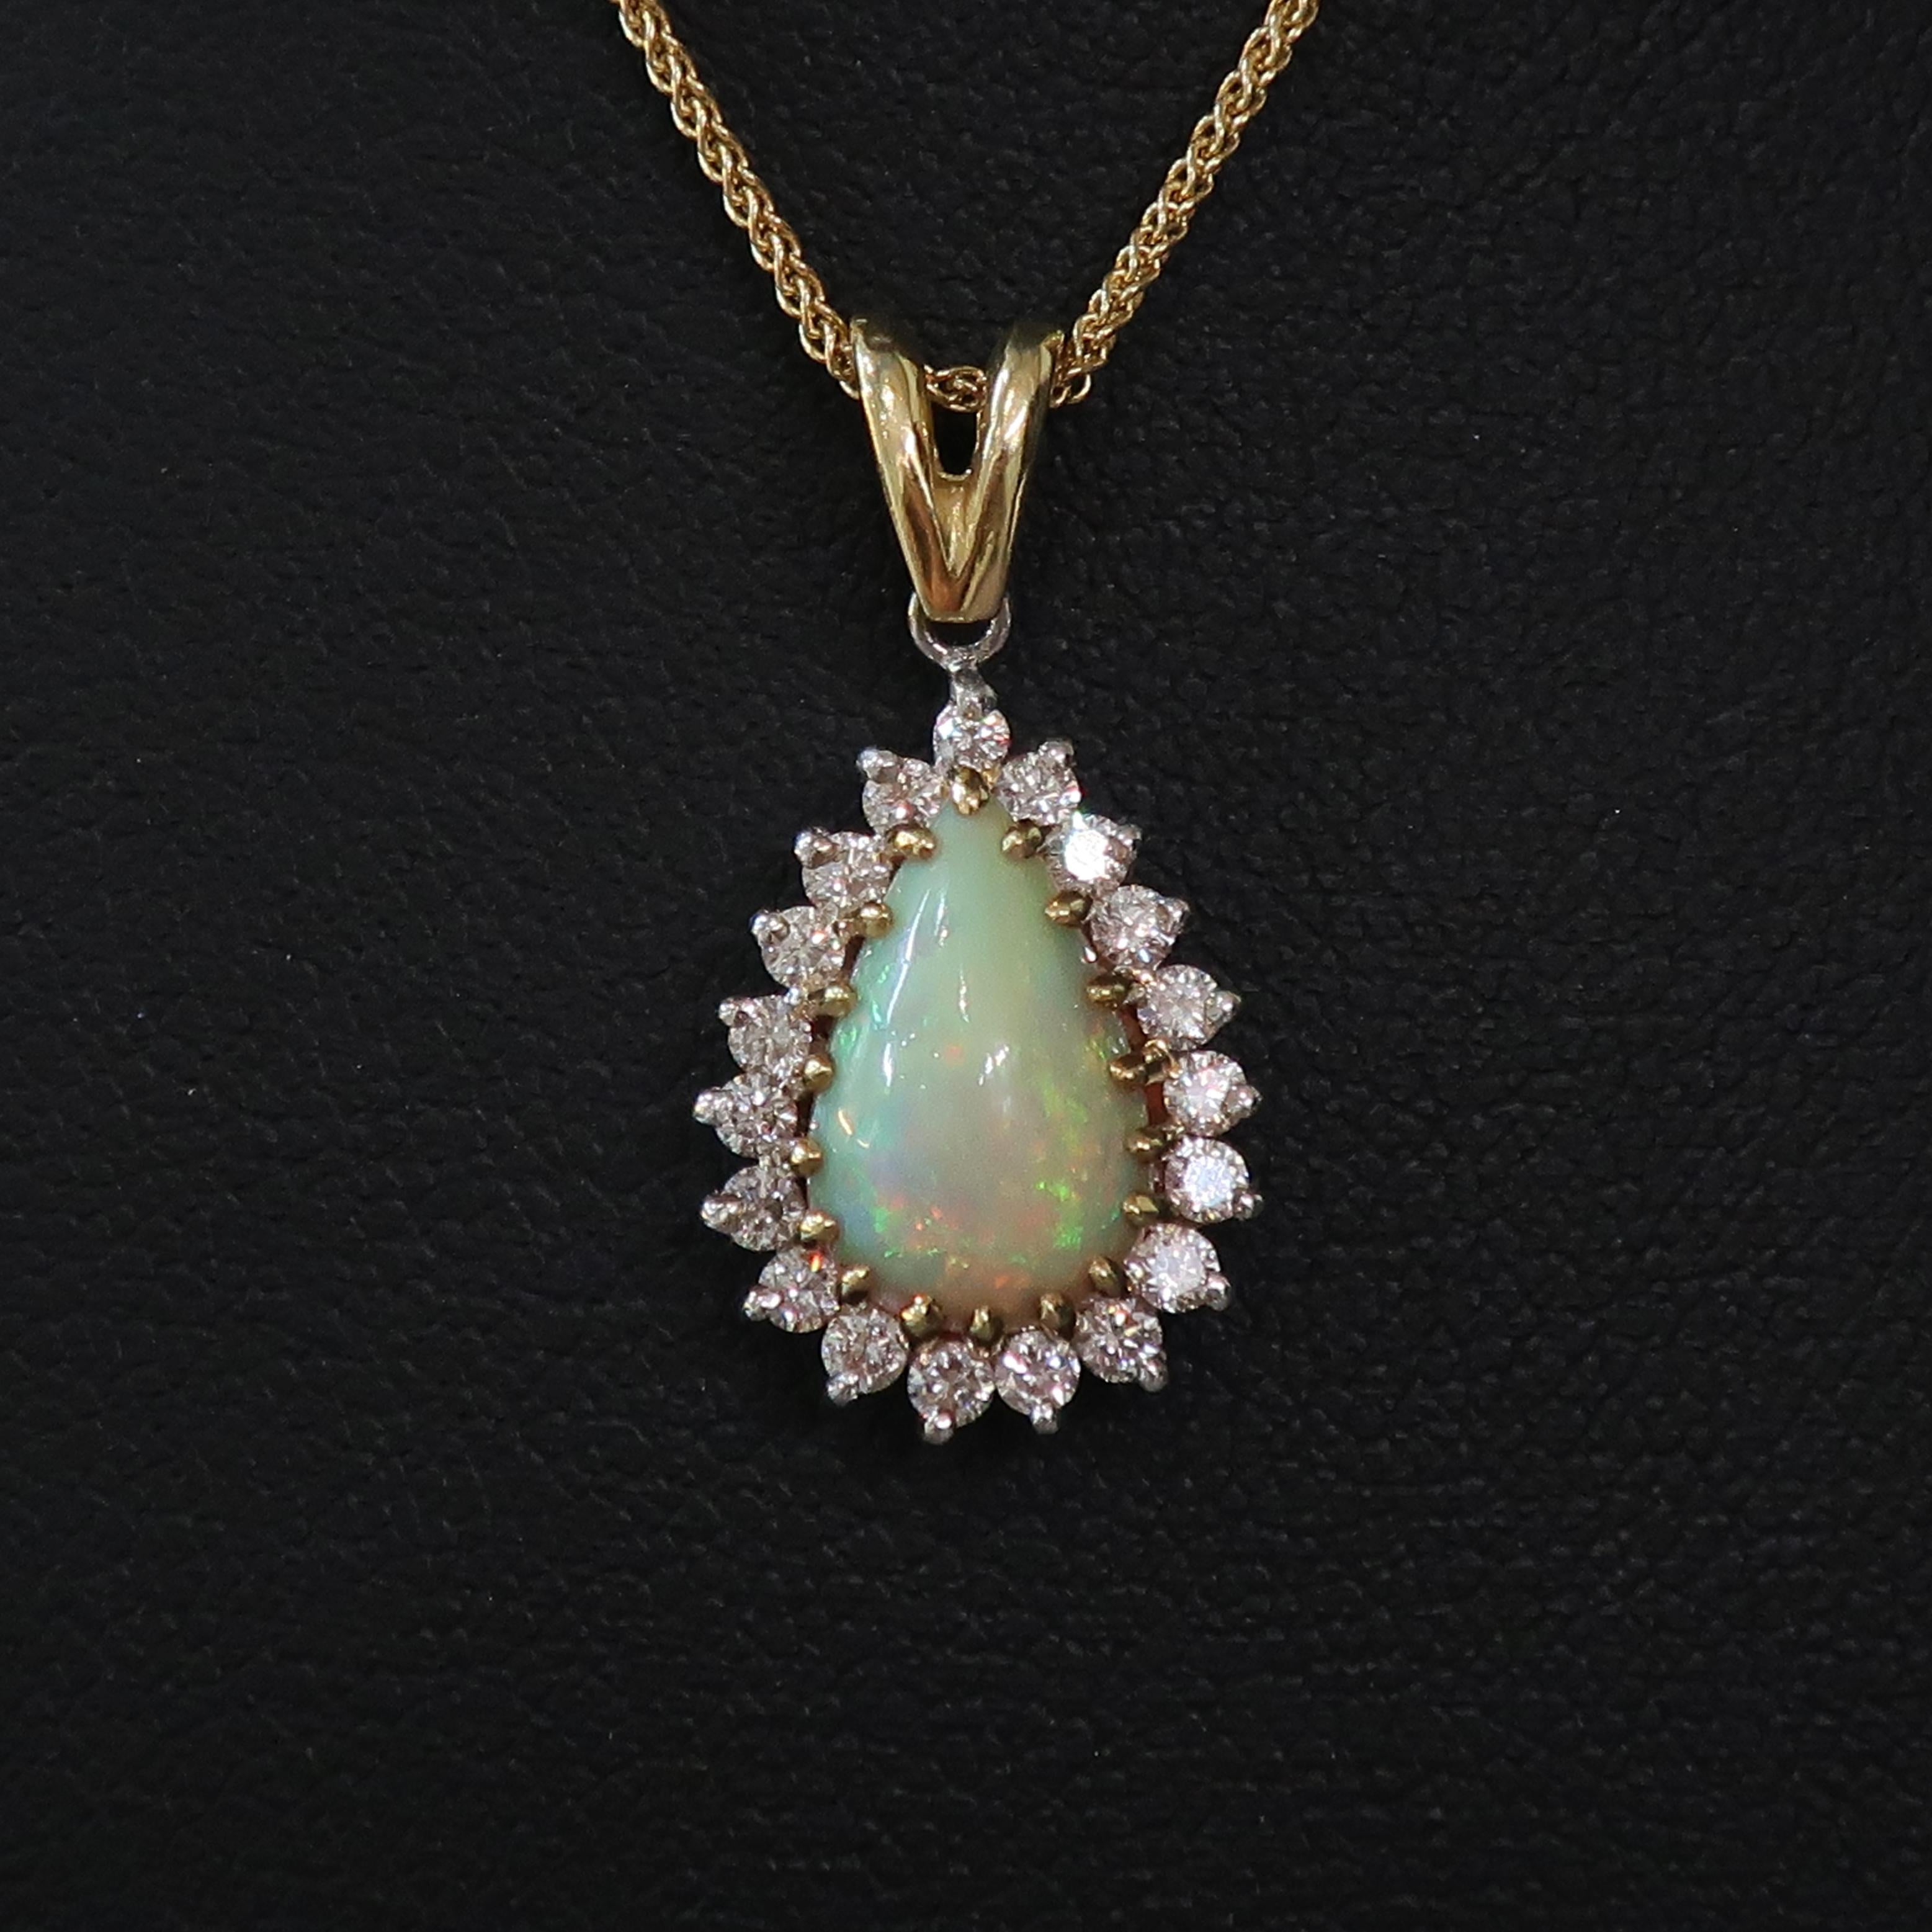 Pear Shape Opal & Diamond Cluster Pendant 18 Karat Yellow and White Gold

A dazzling opal and diamond pendant. Cabochon pear shaped opal set in 18carat yellow gold claws, surrounded by nineteen white brilliant cut diamonds, all claw set in 18ct